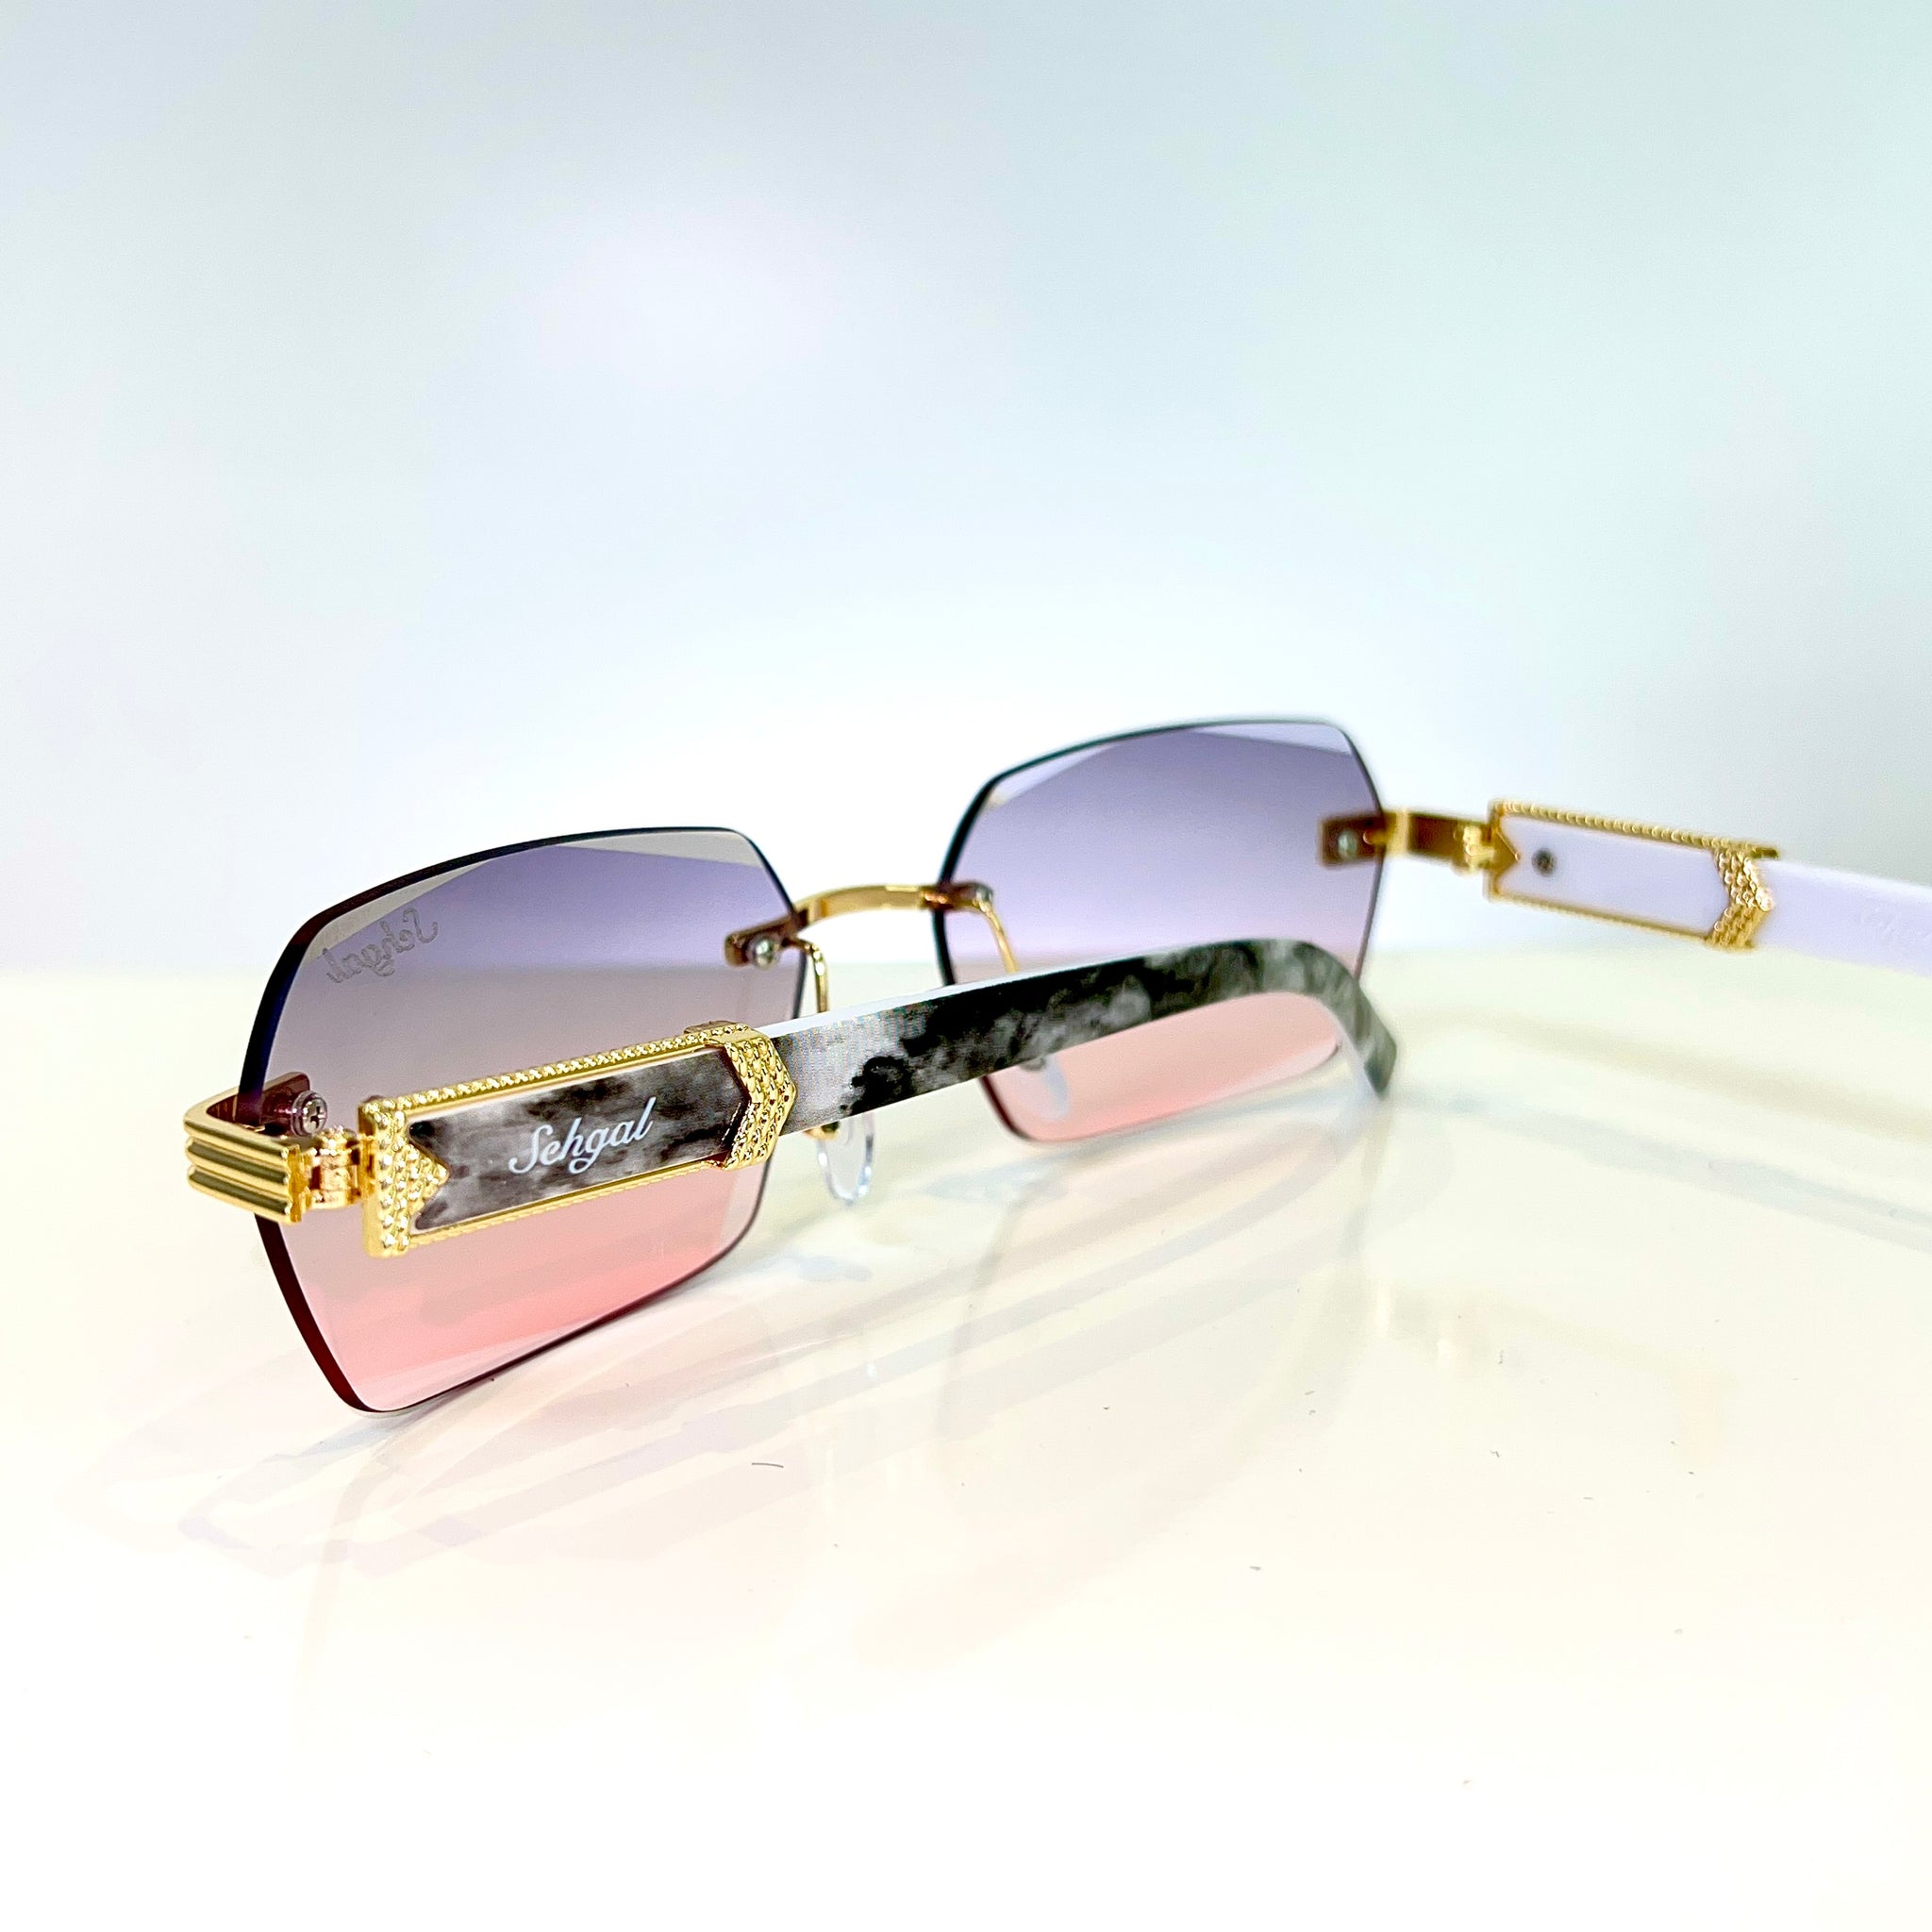 Marblecut Glasses - 14 carat gold plated -  Pink / Grey Shade